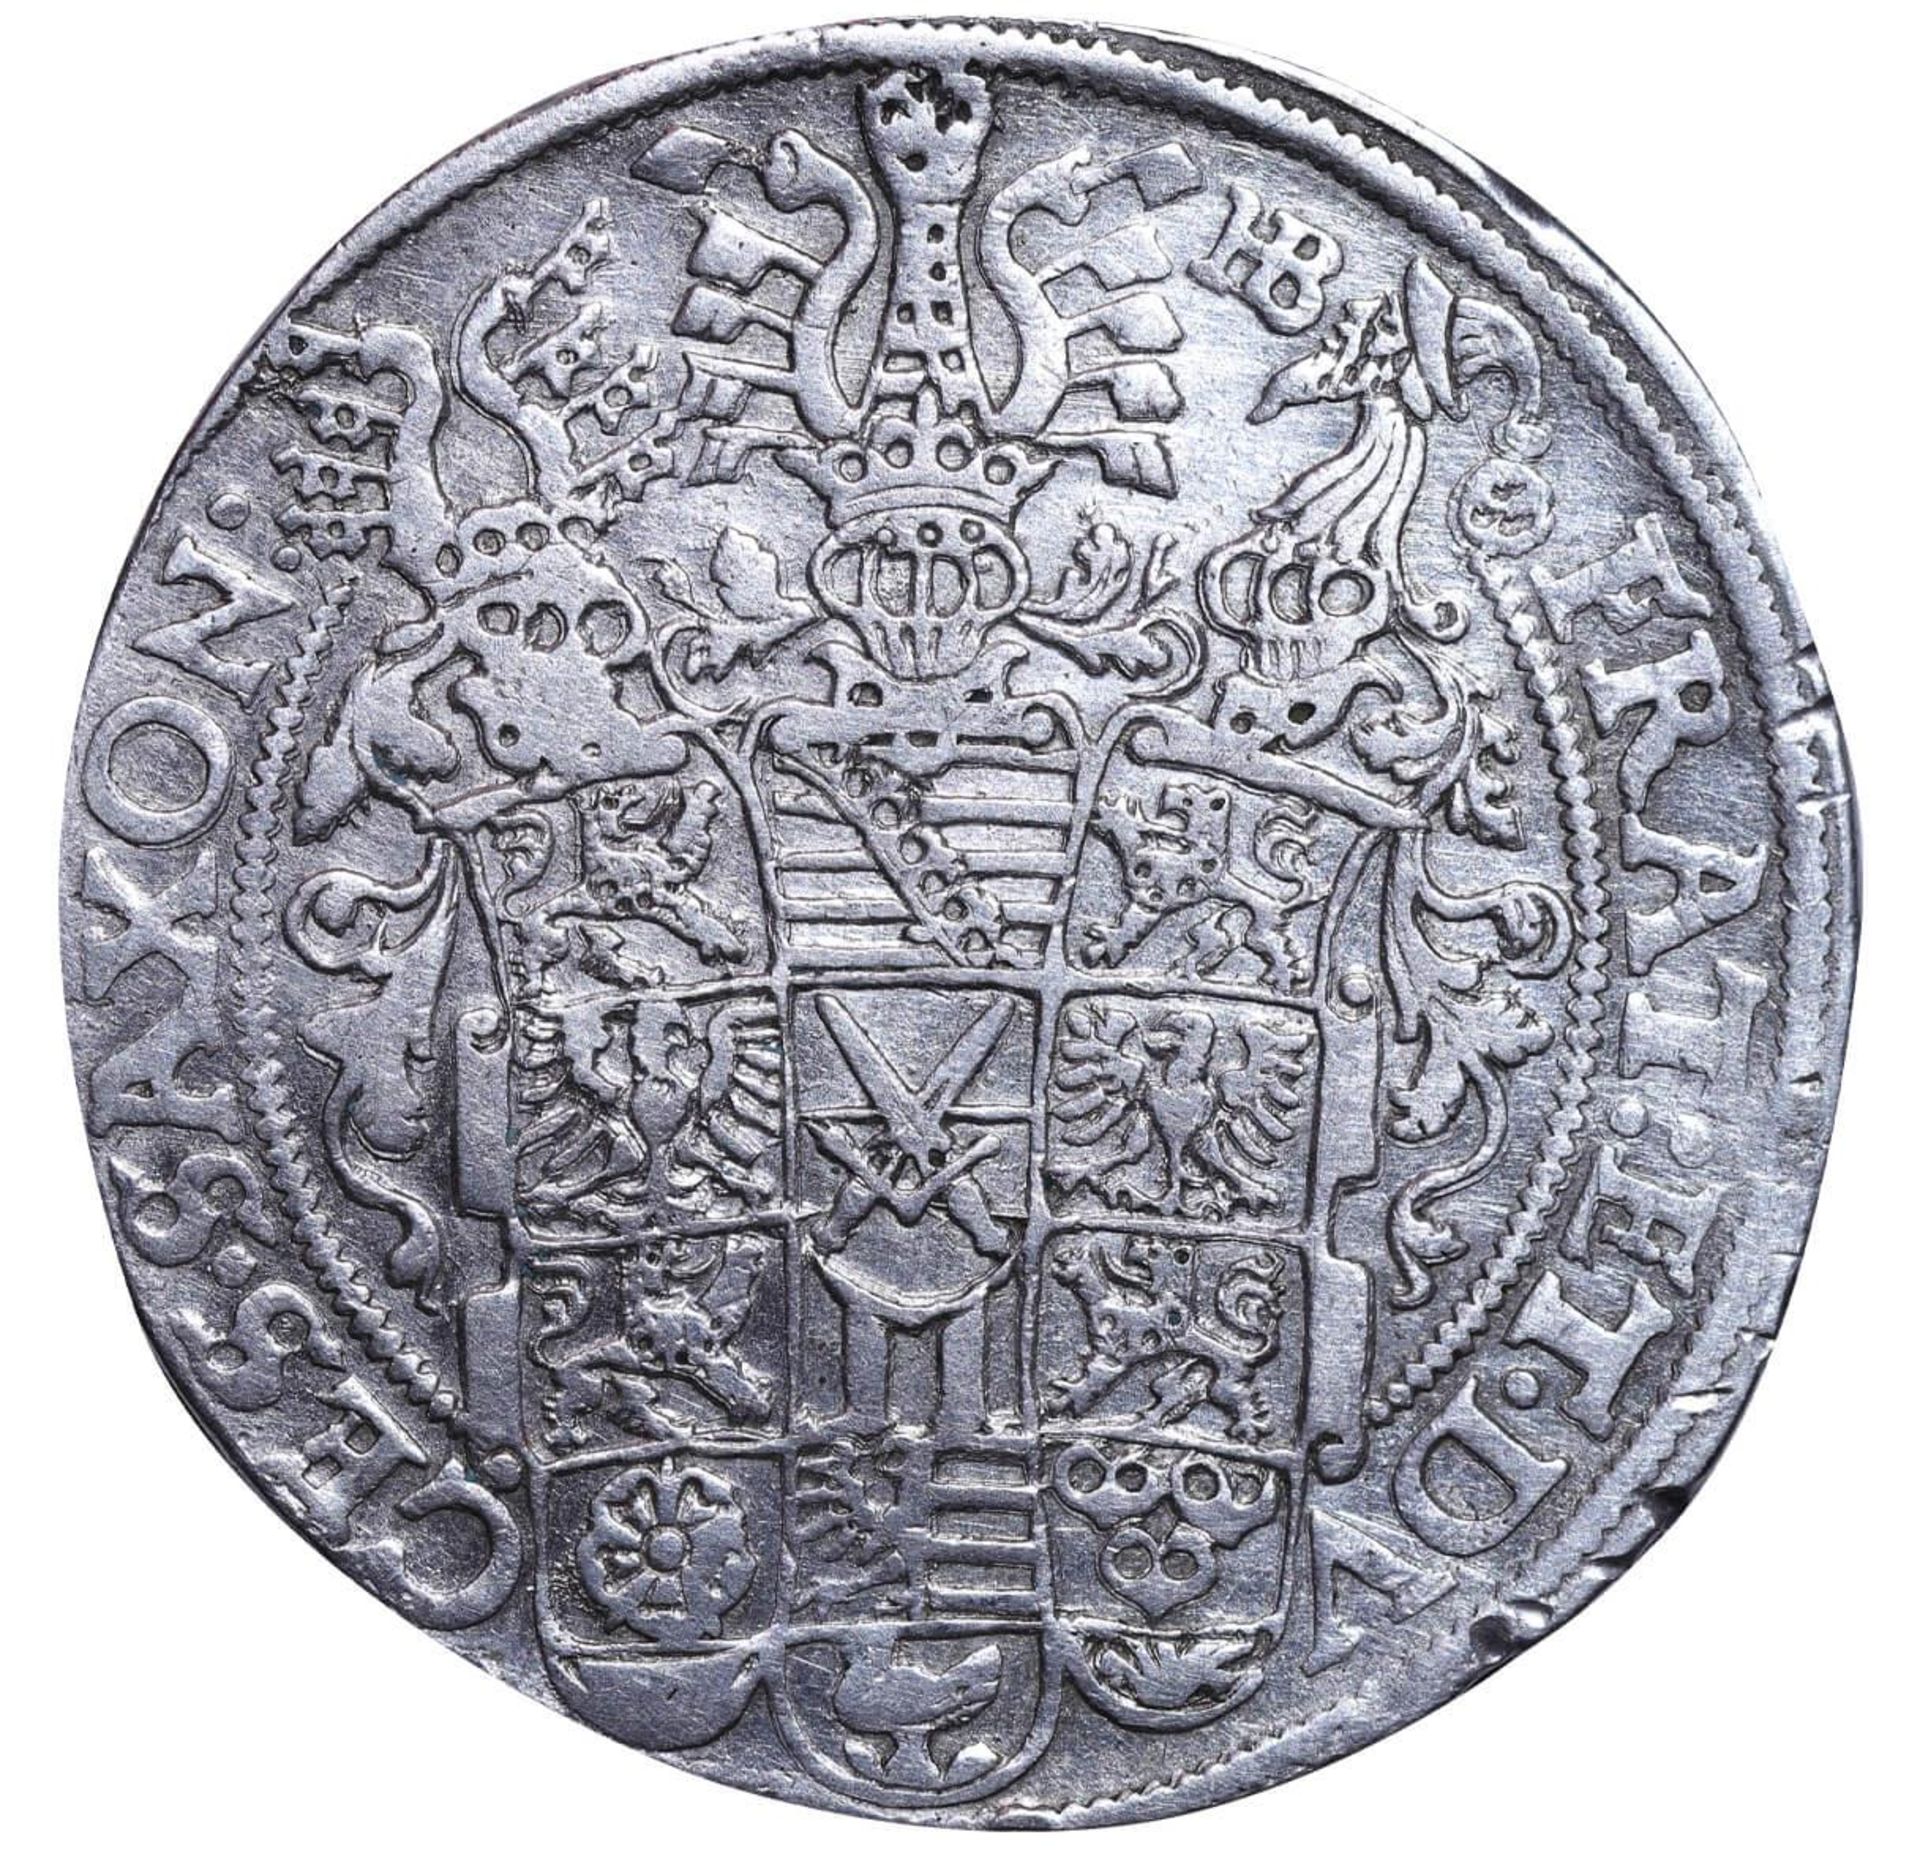 Electorate of Saxony, 1 Thaler, 1599 year, HB - Image 3 of 3